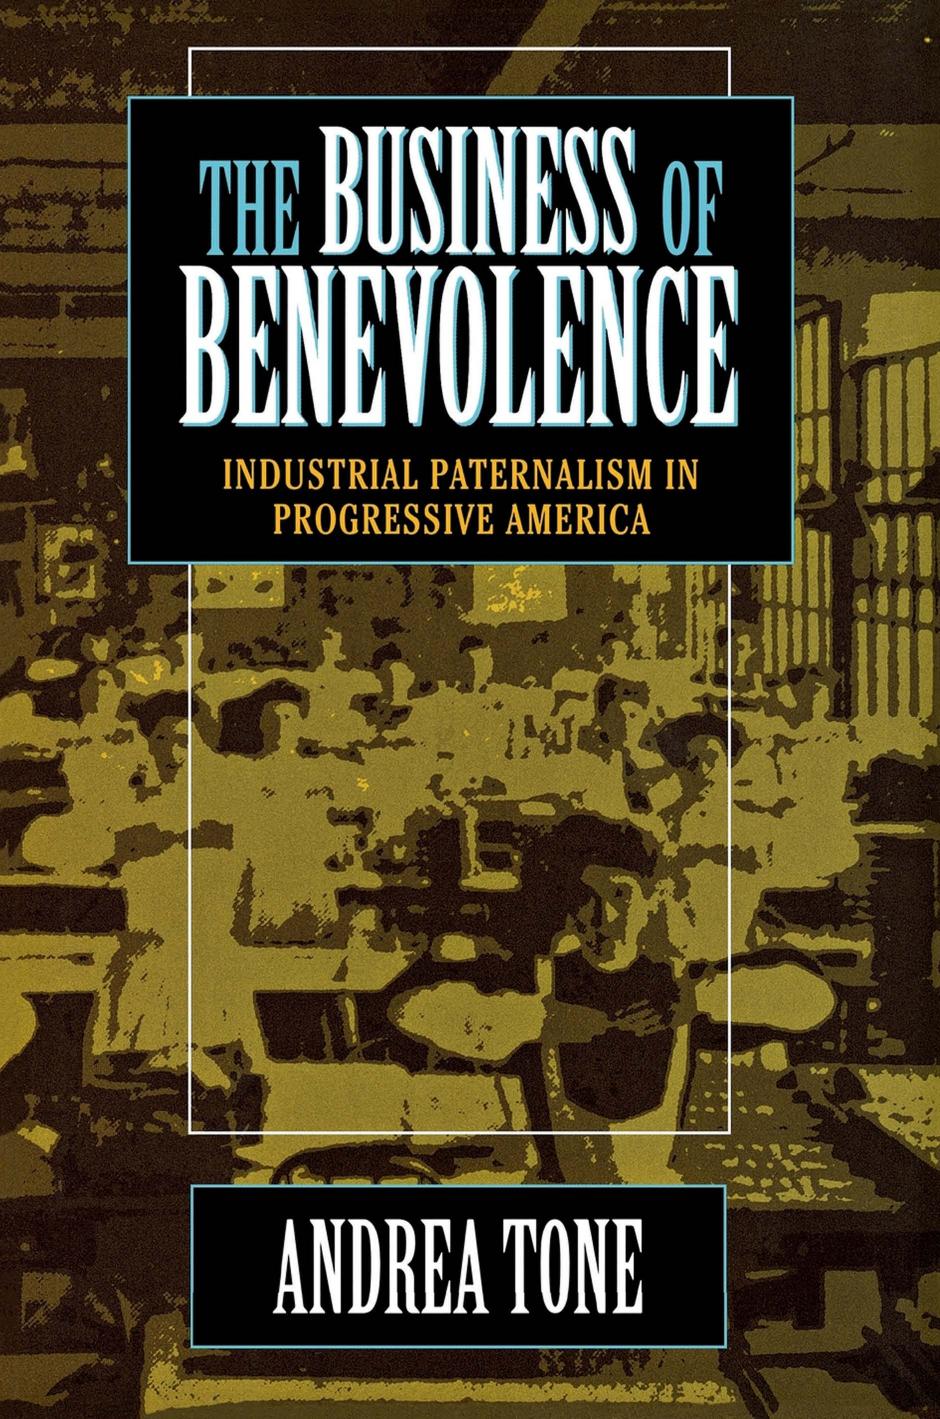 The Business of Benevolence: Industrial Paternalism in Progressive America by Andrea Tone